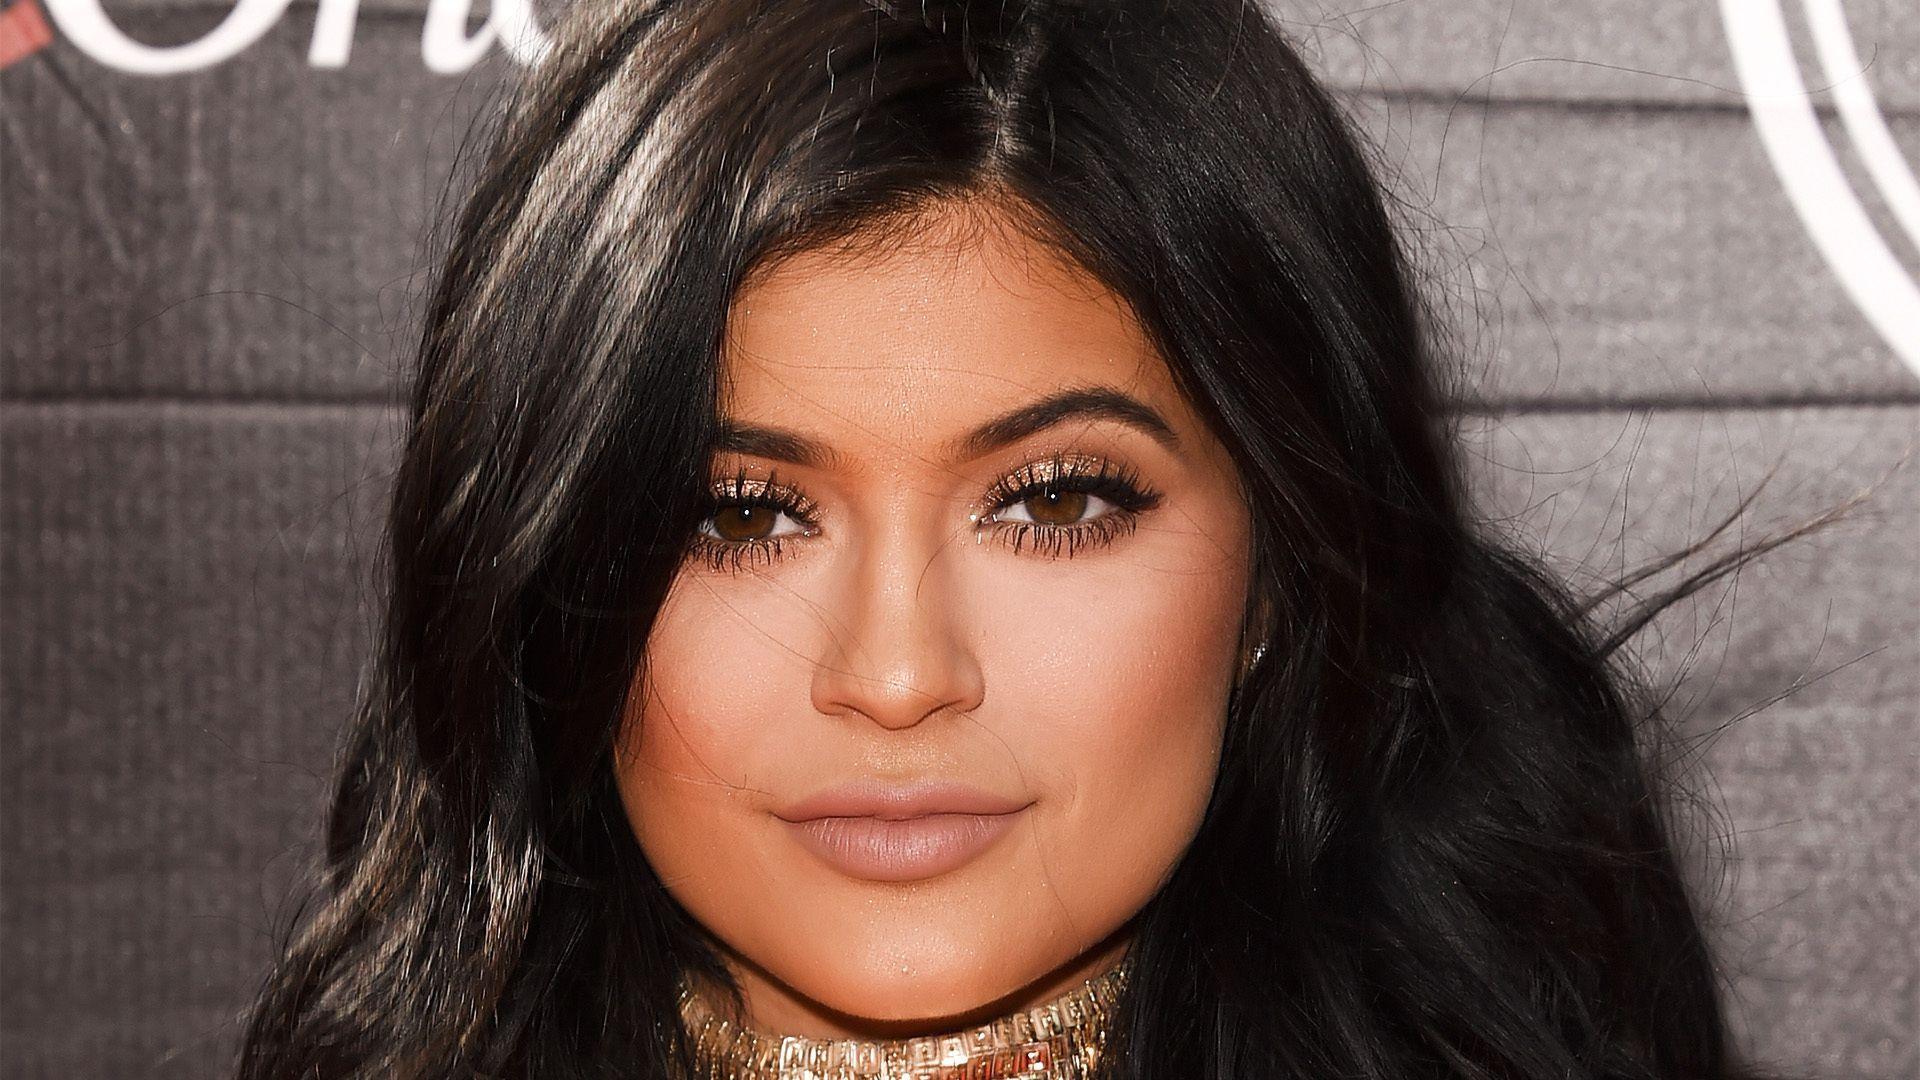 Kylie Jenner Wallpaper Image Photo Picture Background